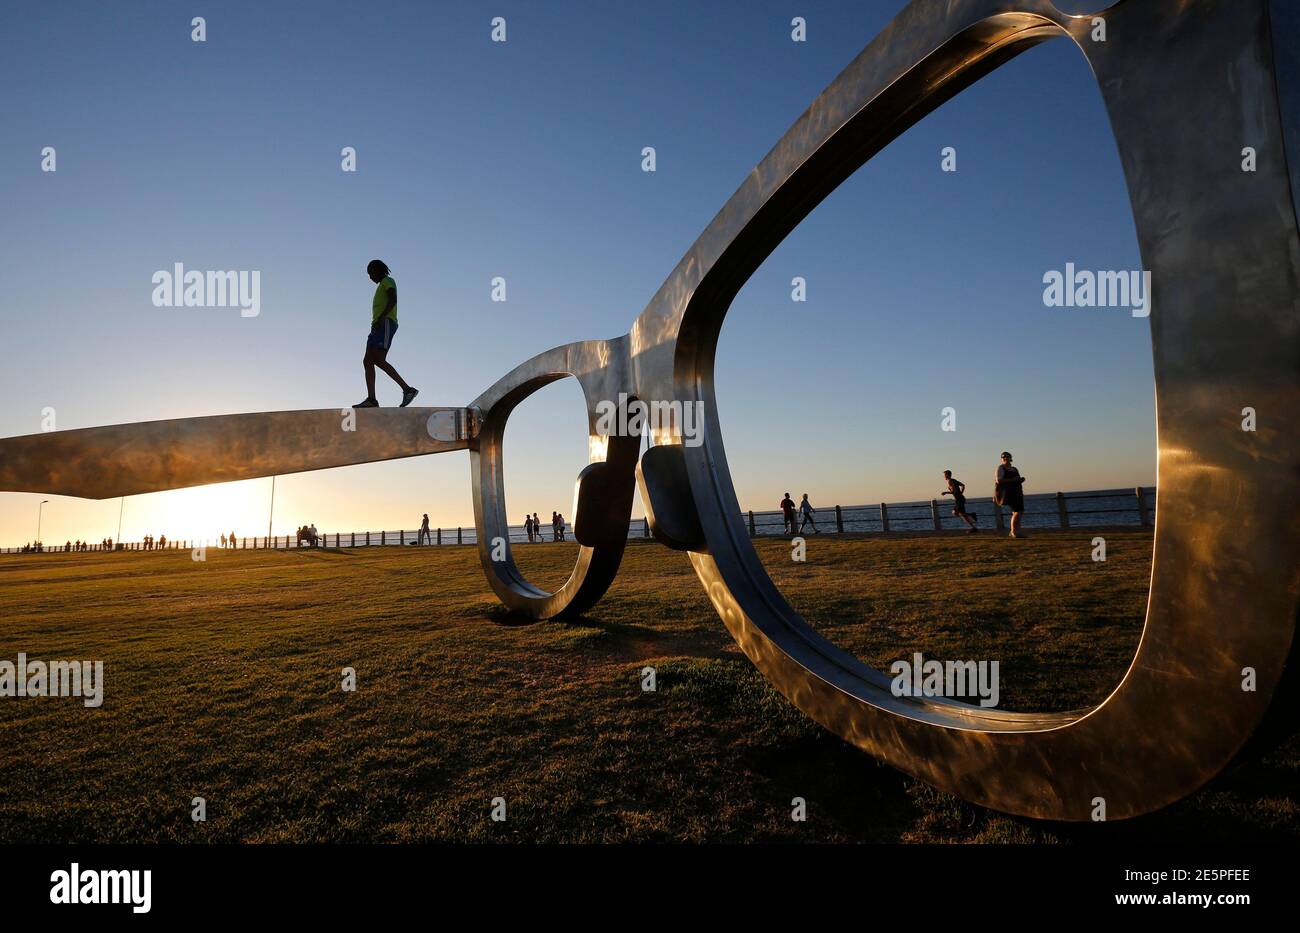 A youth climbs on top of a sculpture in the form of a giant pair of spectacles on Cape Town's Sea Point Promenade, November 18, 2014.  Inspired by Nelson Mandela, the work  'Perceiving Freedom' by artist Michael Elion has stirred some controversy in the local media. While popular with visitors to the promenade, some critics have questioned the association of Mandela's legacy with commercial sponsors.  REUTERS/Mike Hutchings (SOUTH AFRICA - Tags: SOCIETY) Stock Photo